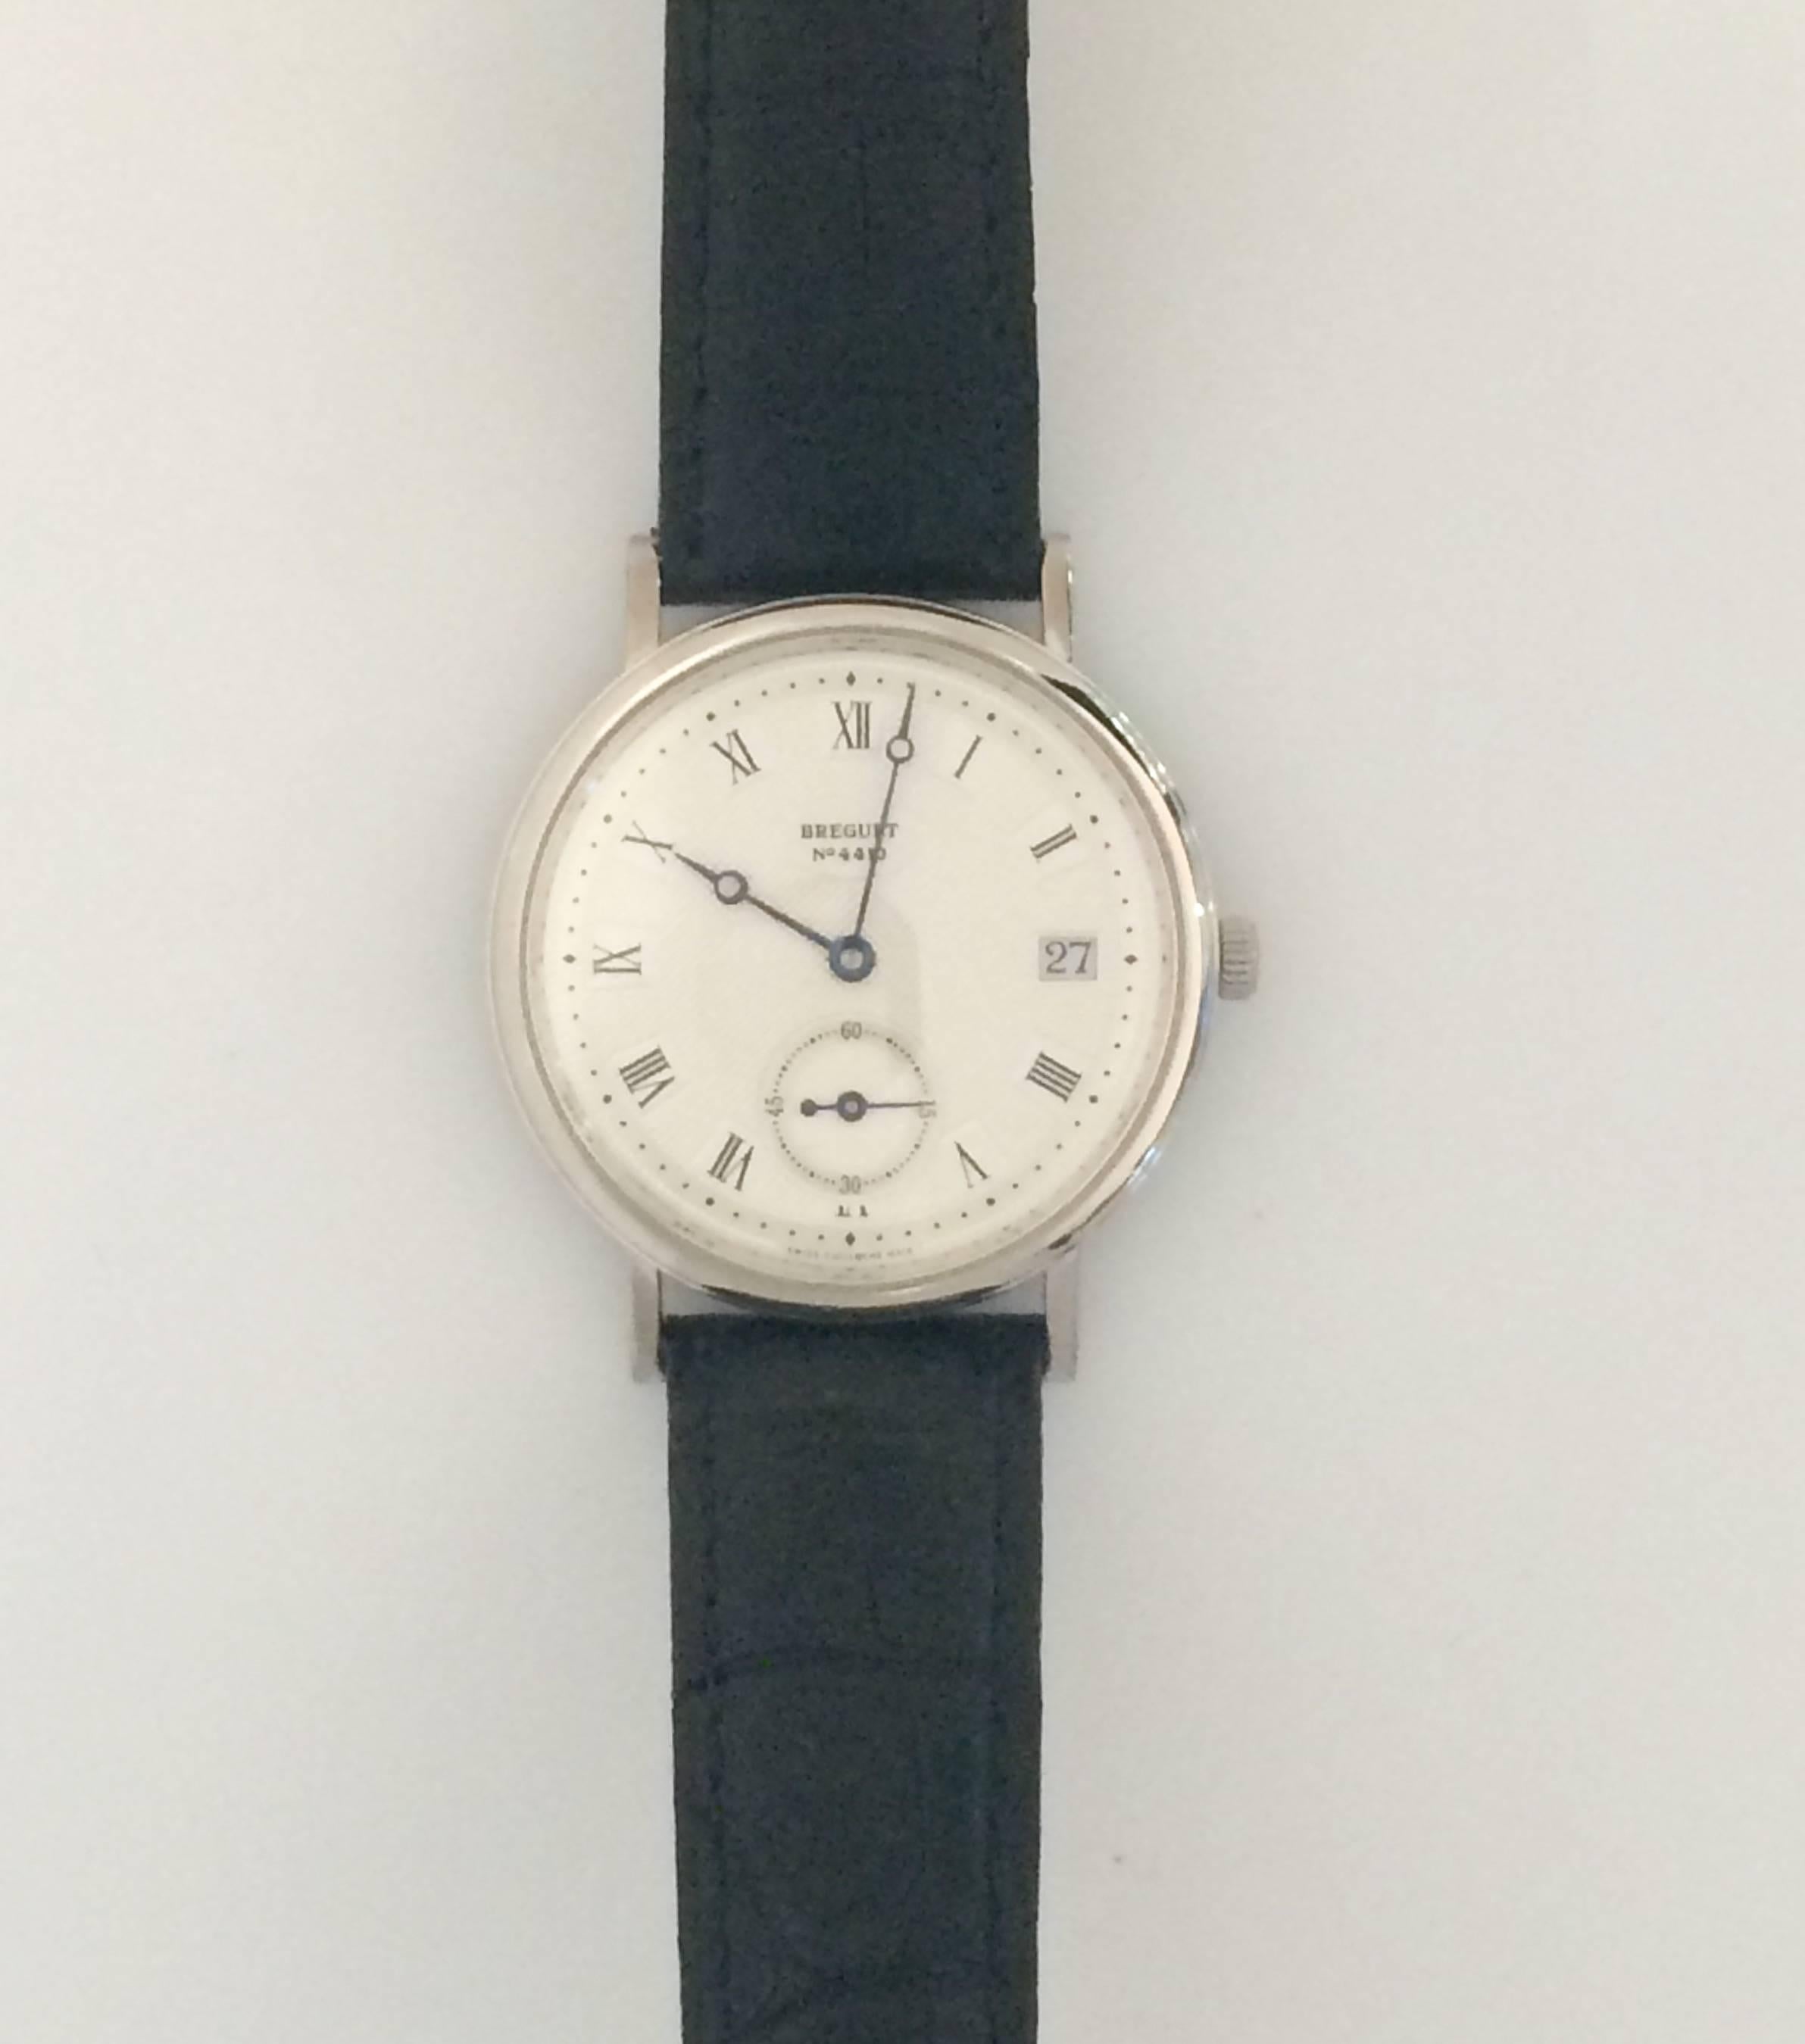 Breguet White Gold Classique Date Automatic Wristwatch Ref 5920 In New Condition For Sale In Ottawa, Ontario